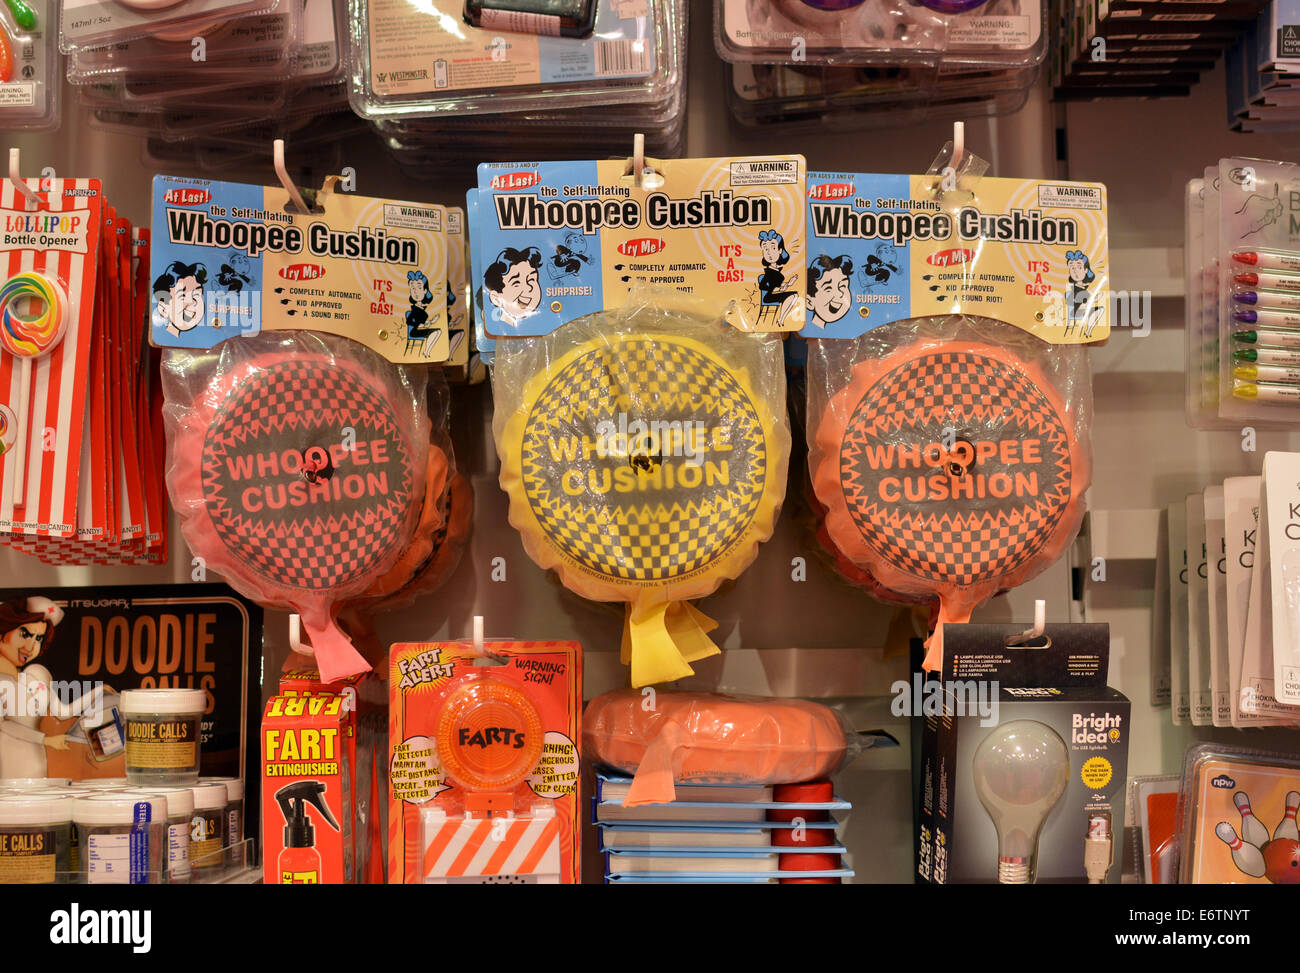 Interior of IT'SUGAR store on Broadway in Greenwich Village. A display of Whoopee Cushions for sale. Stock Photo